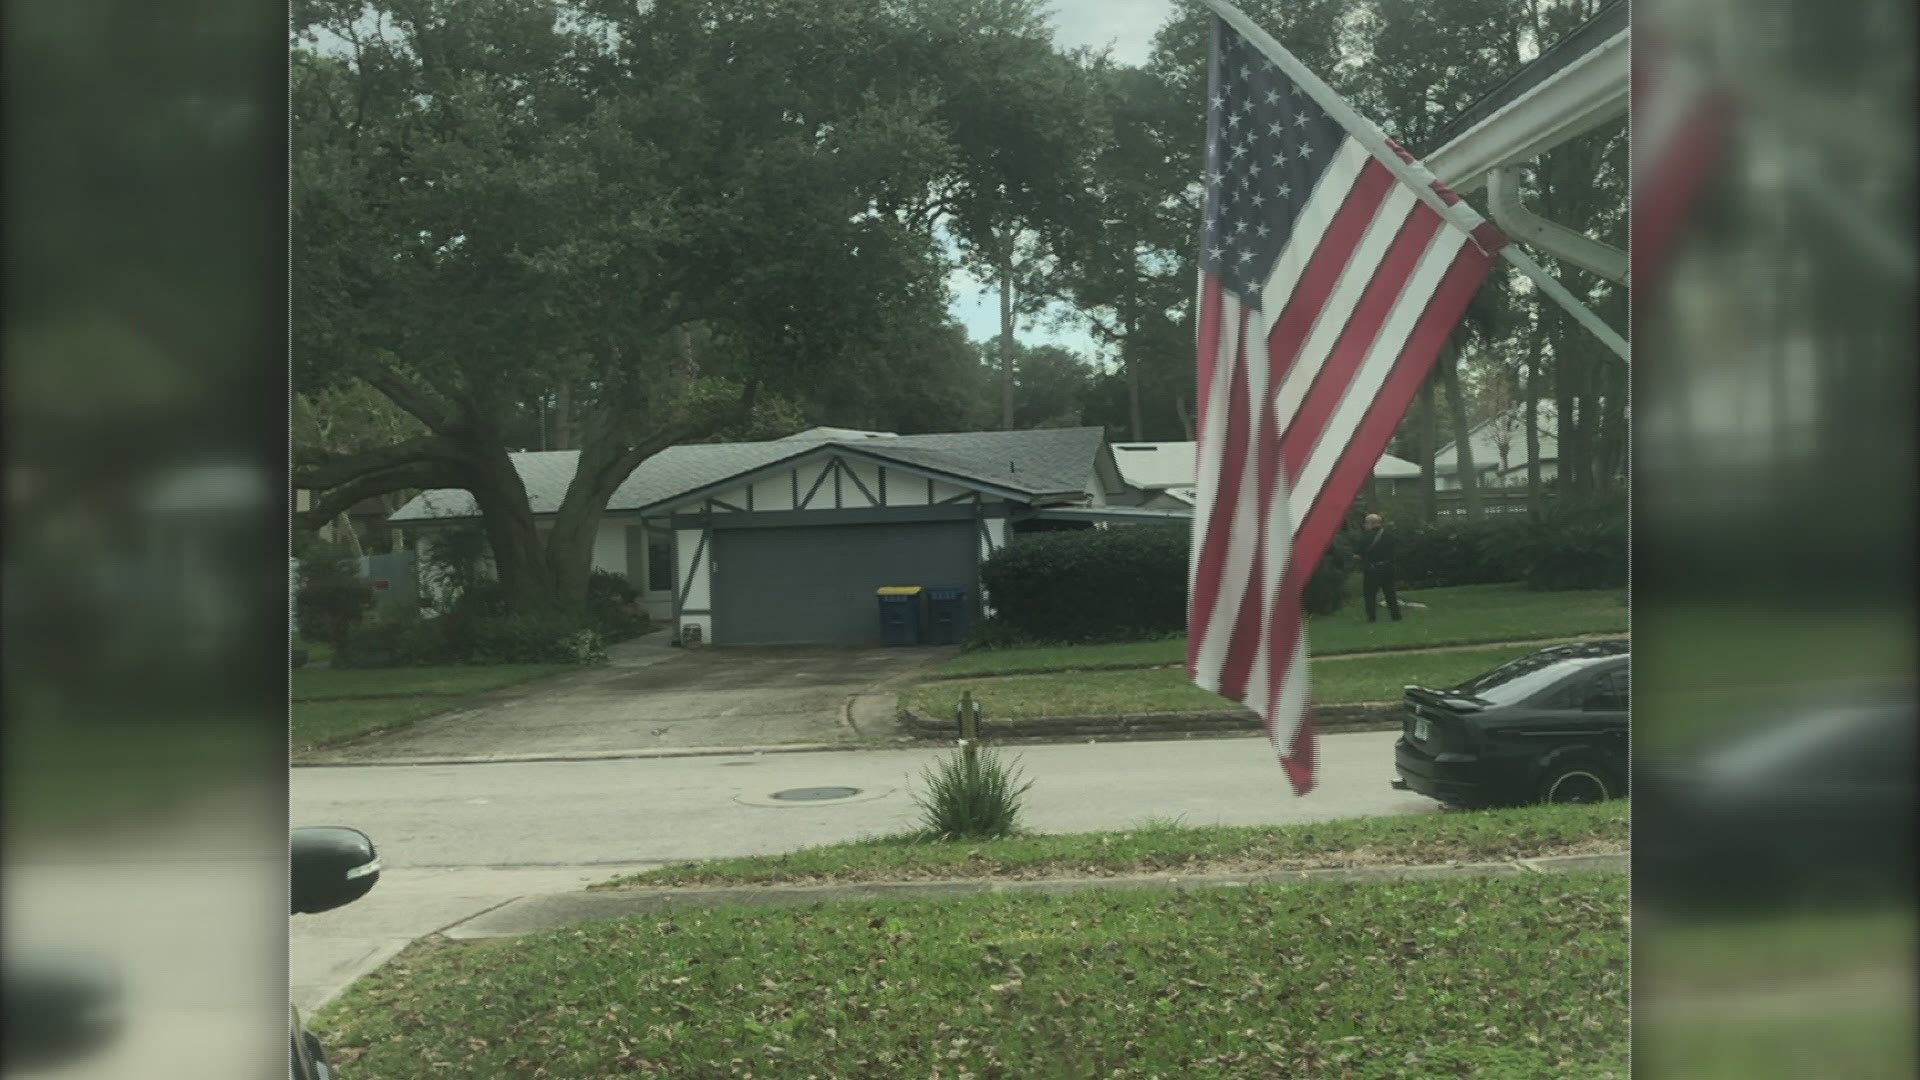 A neighbor captured the vehicle leaving the citizen's garage on video. In the video, you can see the car pulling out of the driveway, and armed officers meeting it in the street.